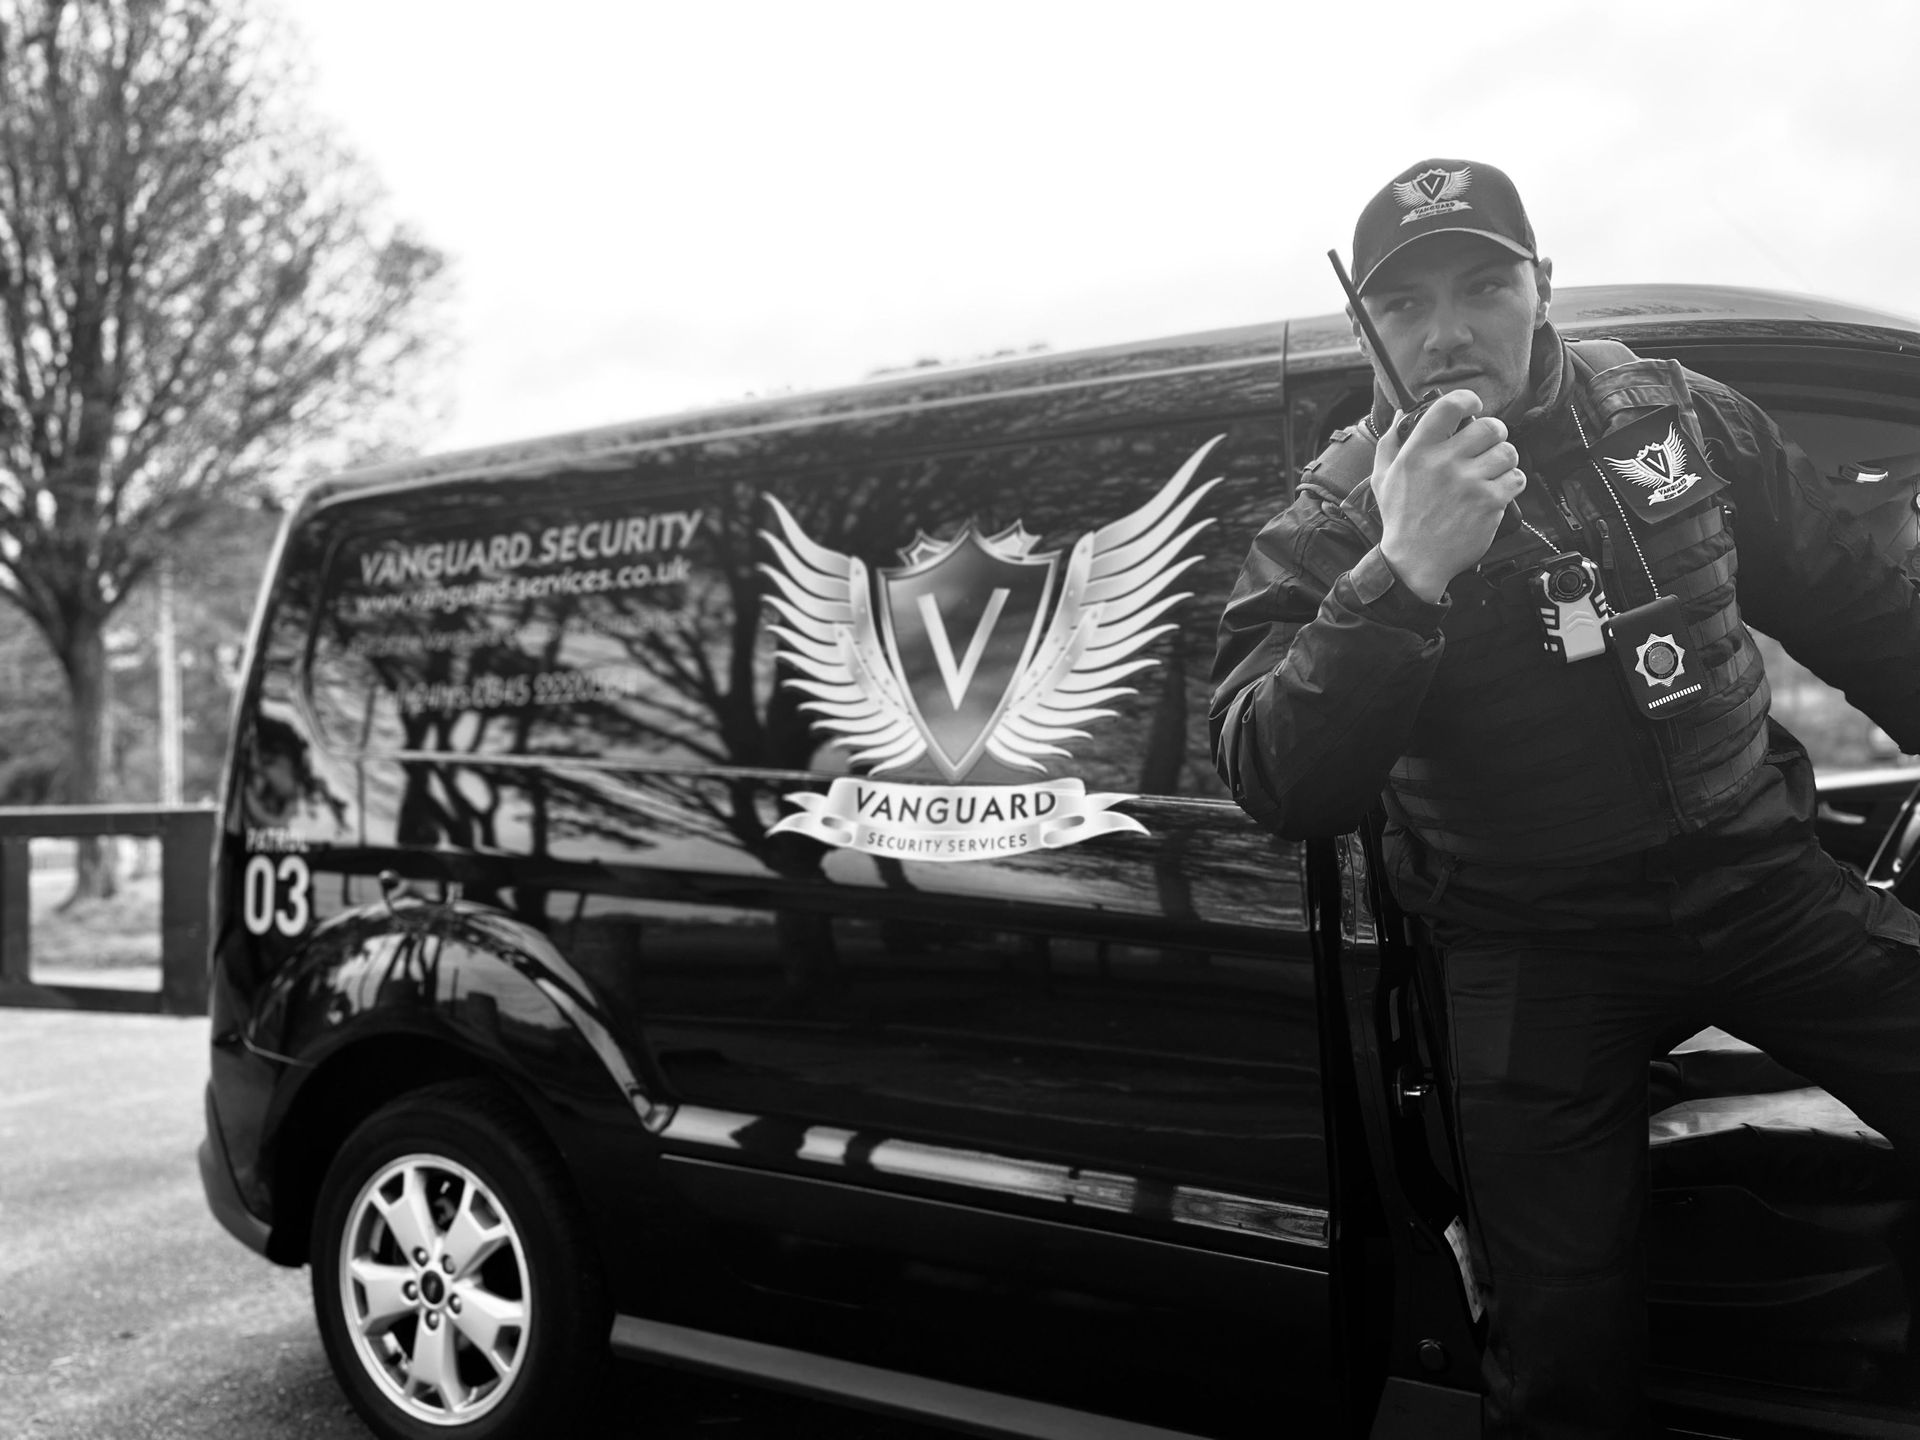 Manned guarding and security patrol service by Vanguard Security in Bournemouth